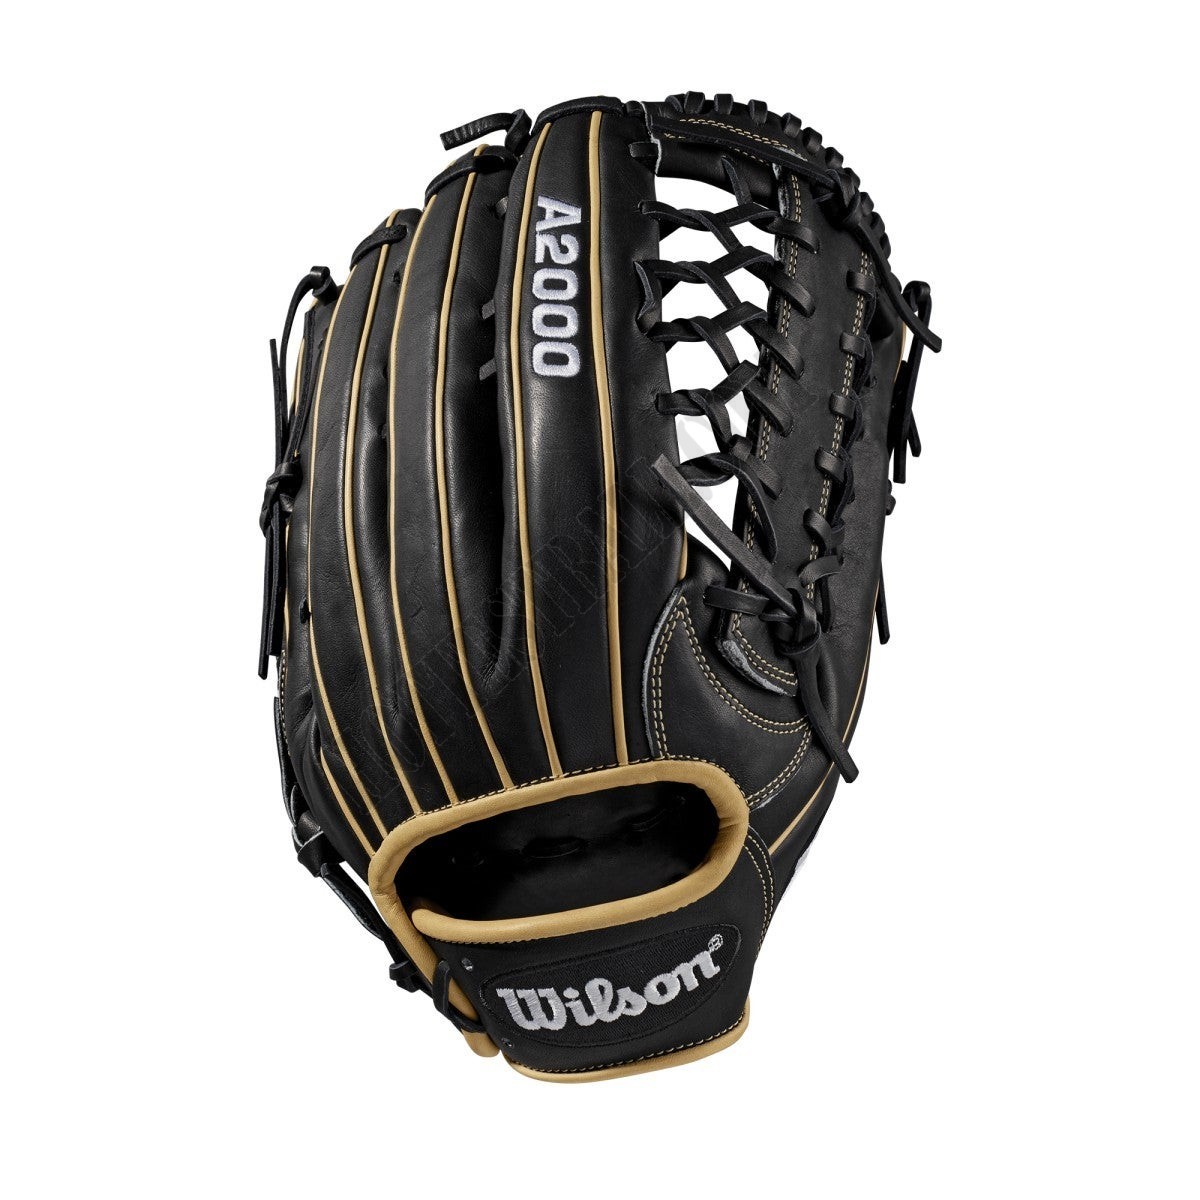 2019 A2000 KP92 12.5" Outfield Baseball Glove ● Wilson Promotions - -1